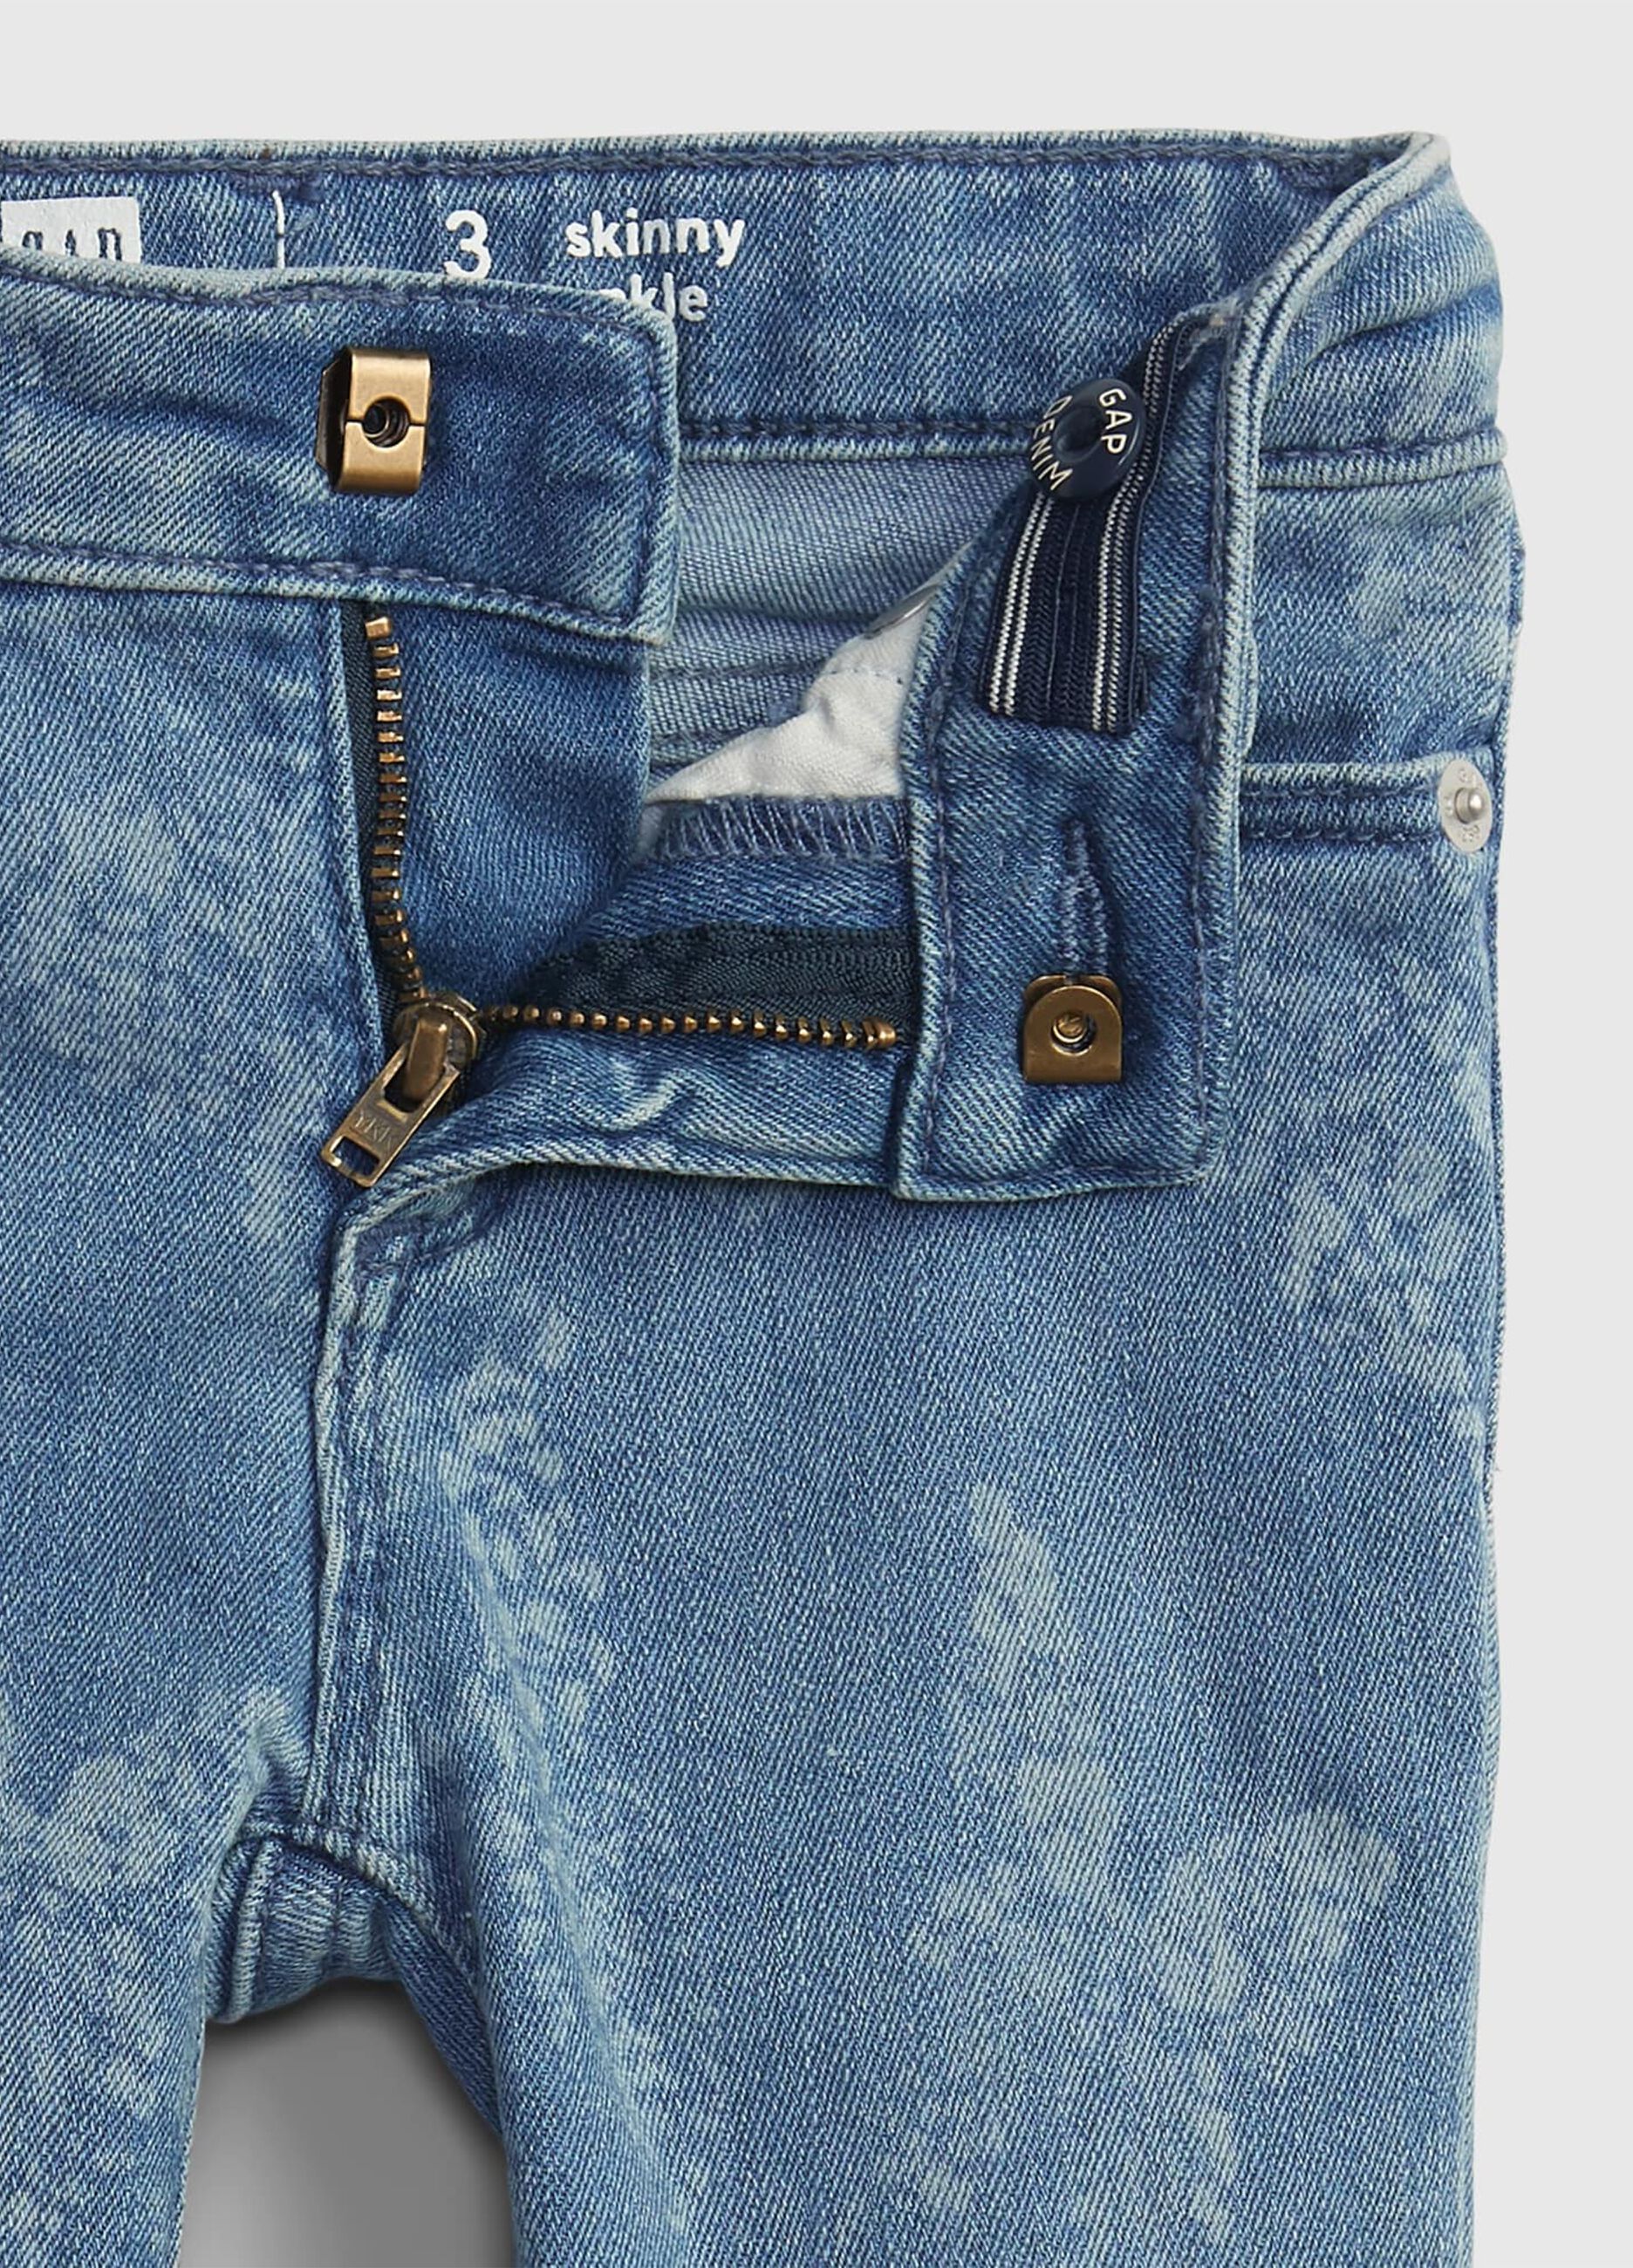 Jeans skinny fit con stampa farfalle